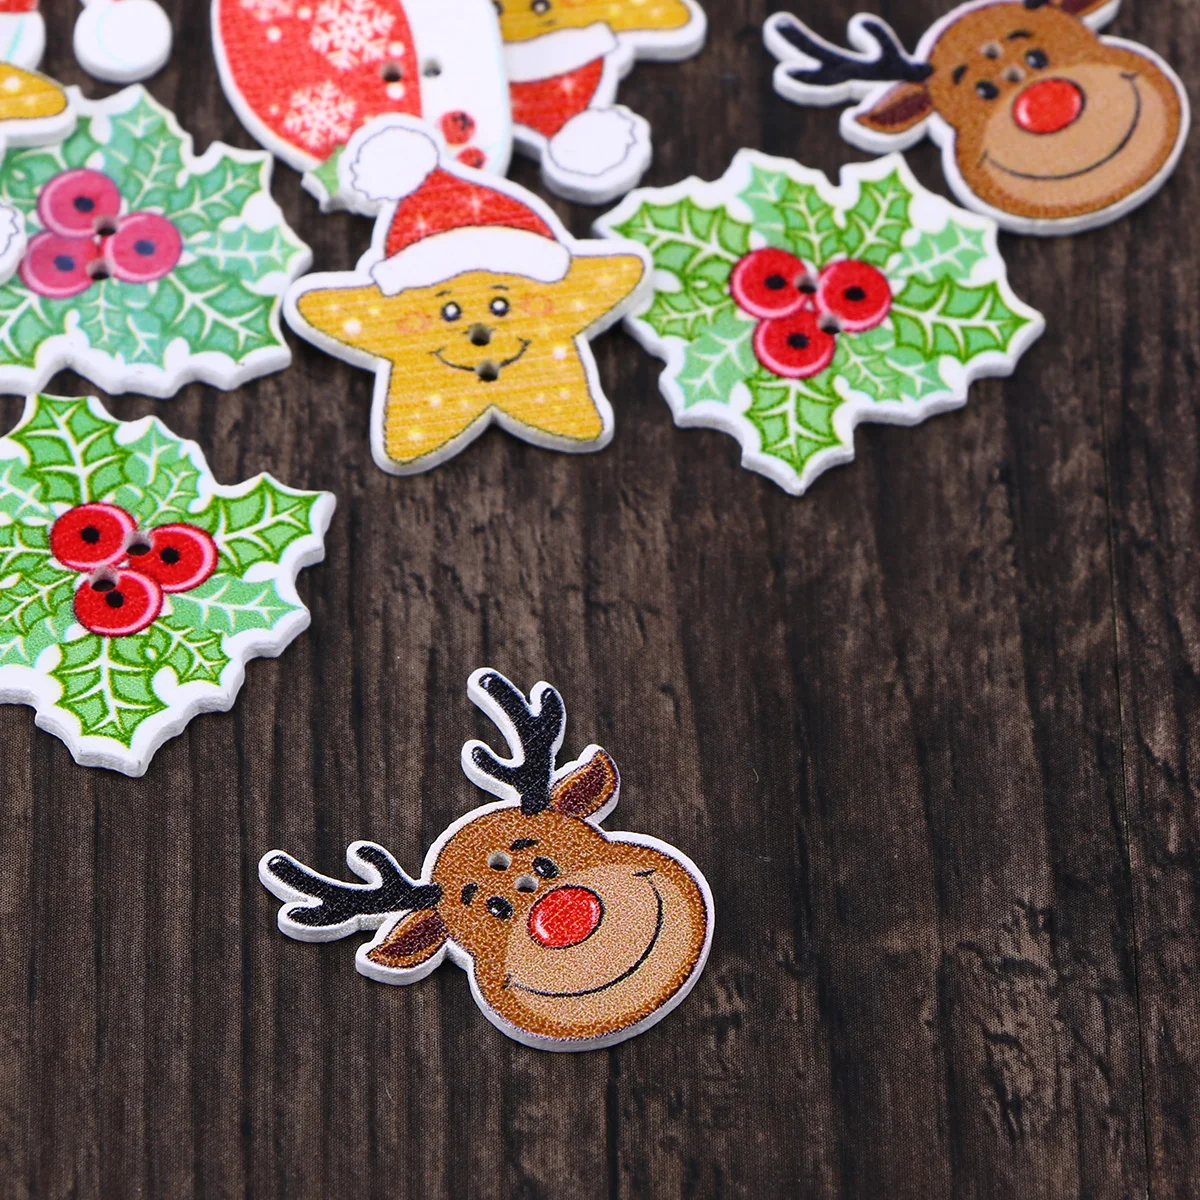 

Buttons Christmas Wooden Craftsholiday Diycartoon Mini Pattern Sewing Snowflake Tree Hat Button Decor Craft Santa Tiny Colorful